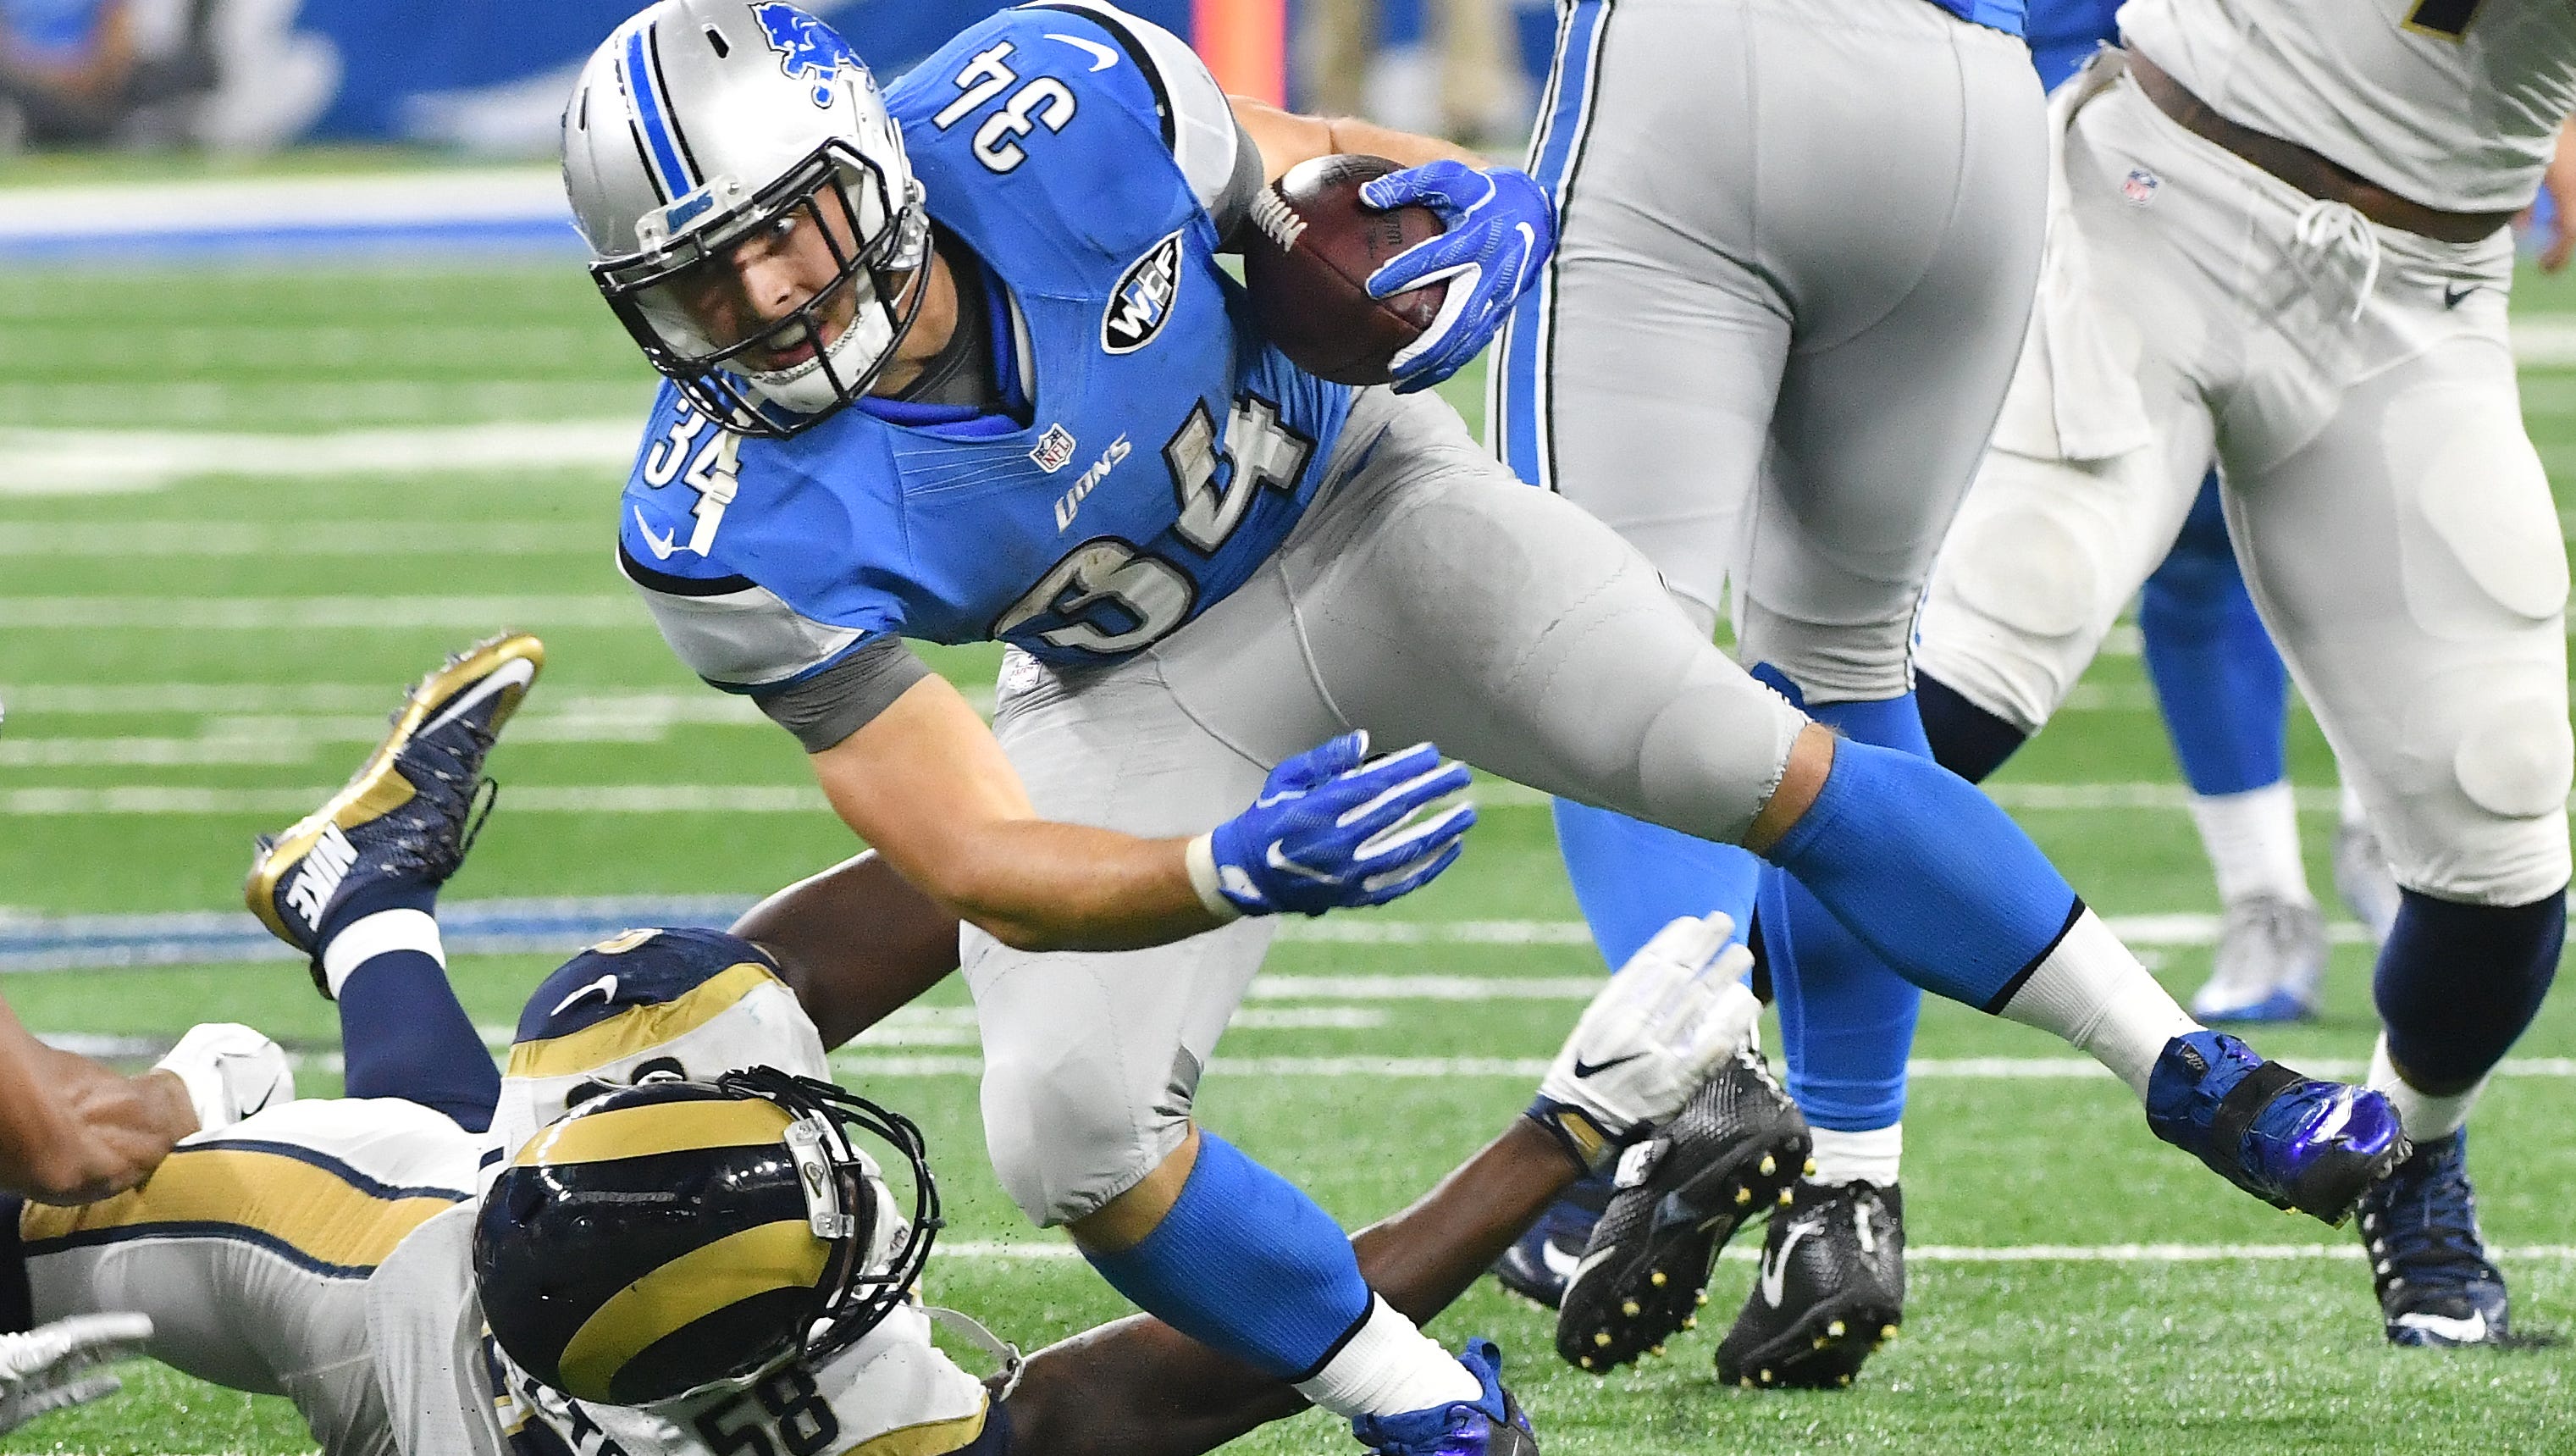 Lions running back Zach Zenner sidesteps the Rams' Cory Littleton on the Lions' winning drive late in the fourth quarter.